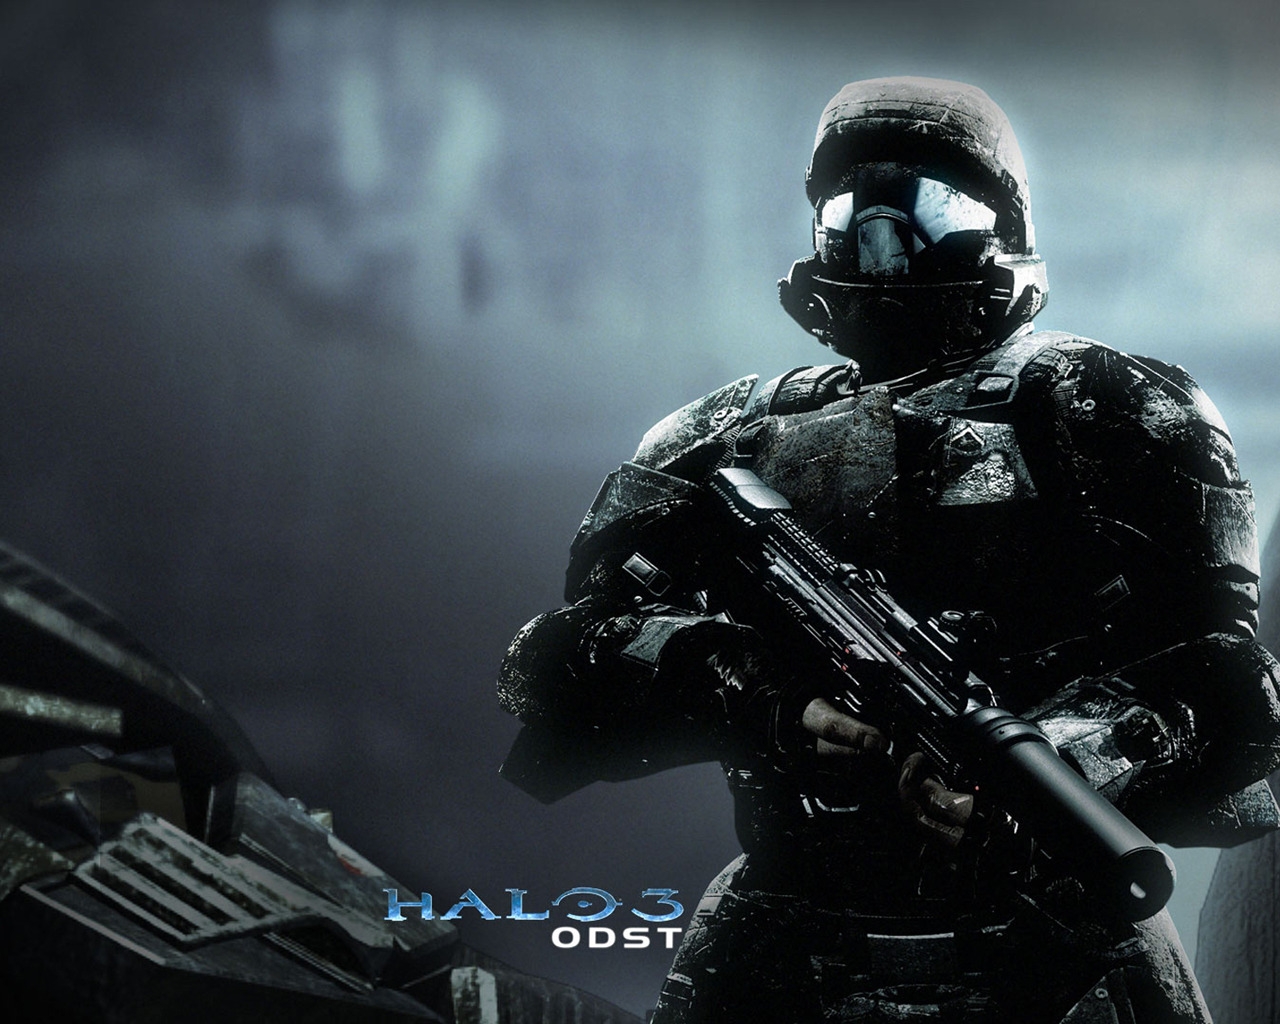 Halo 3 ODST for 1280 x 1024 resolution